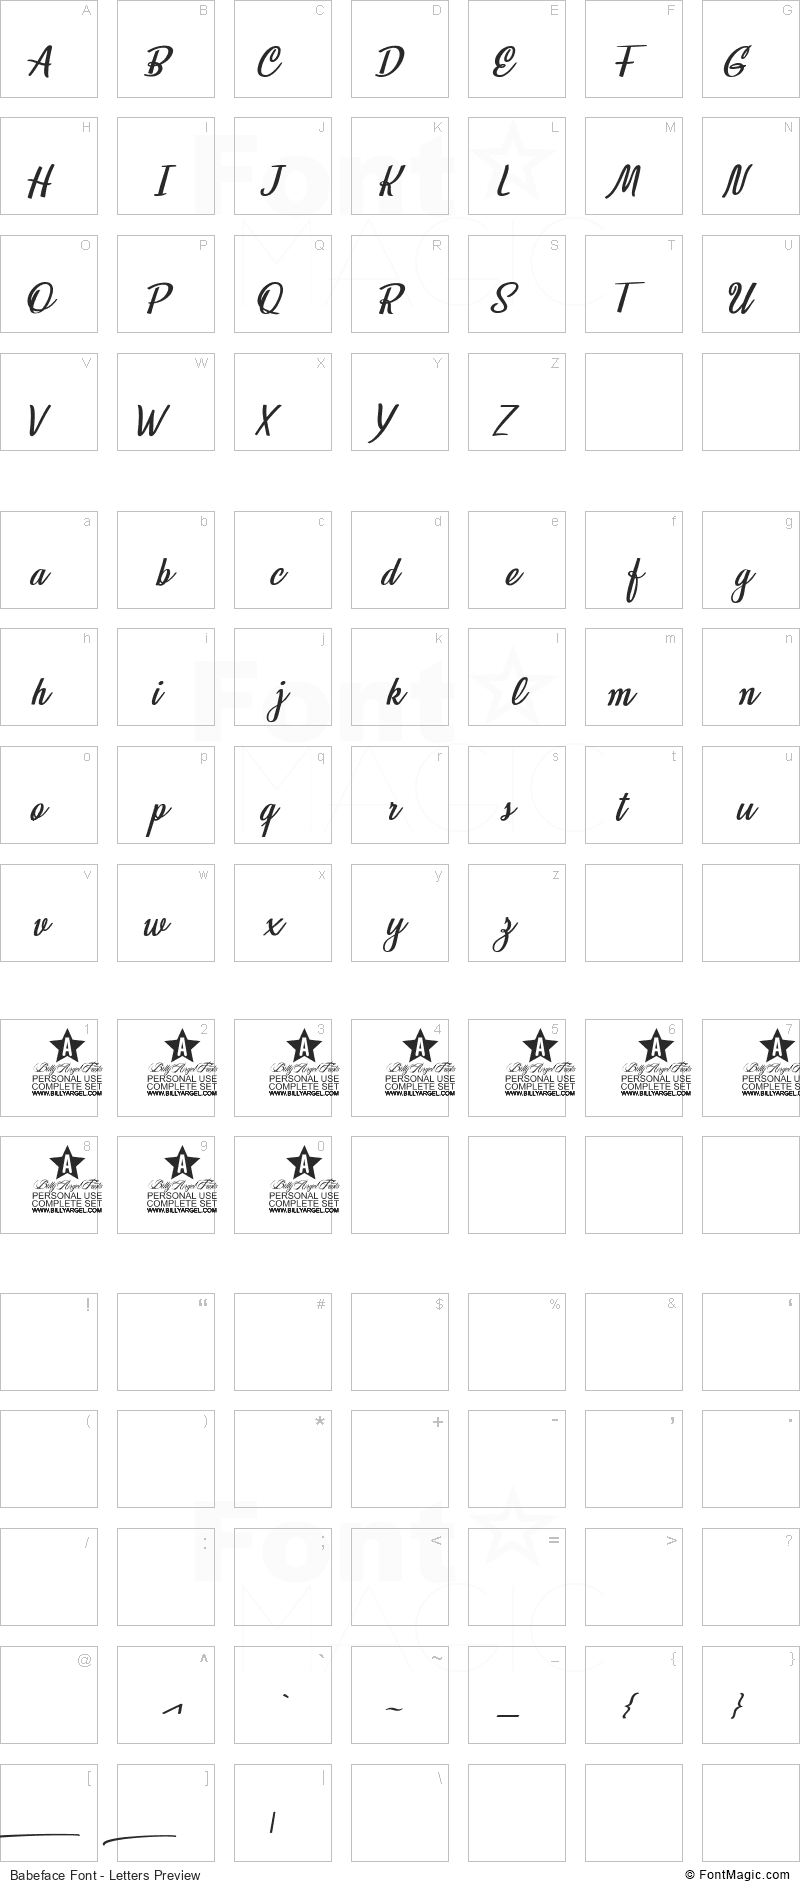 Babeface Font - All Latters Preview Chart